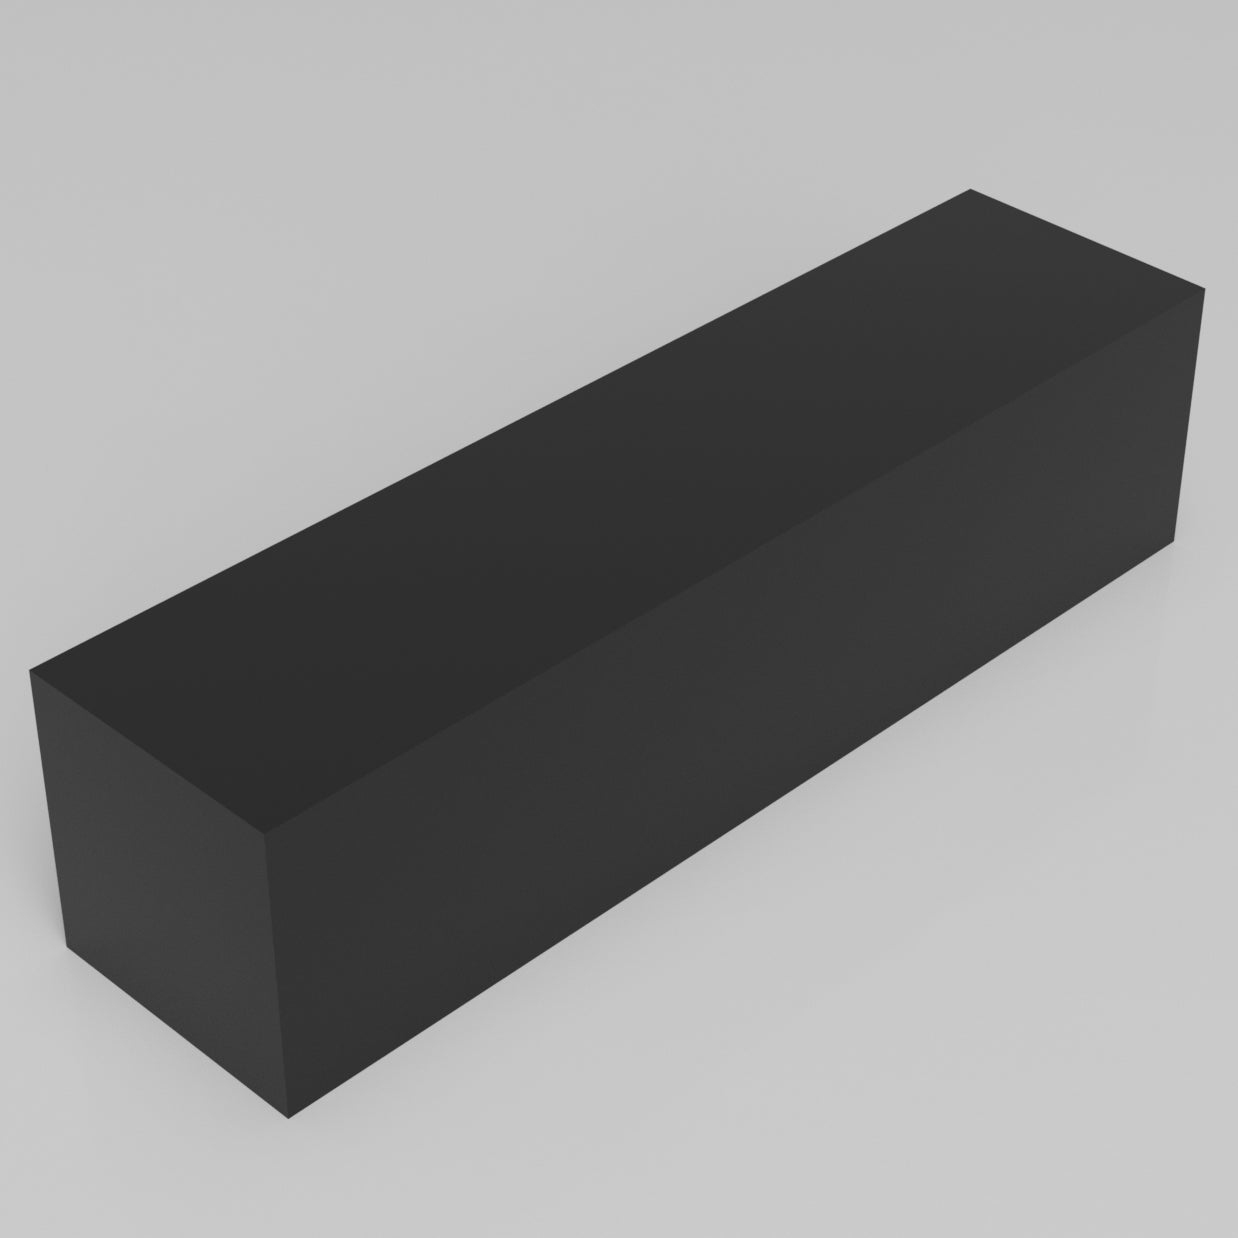 Machinable Wax Rectangular Block Front View 3 Inch by 3 Inch by 12 Inch